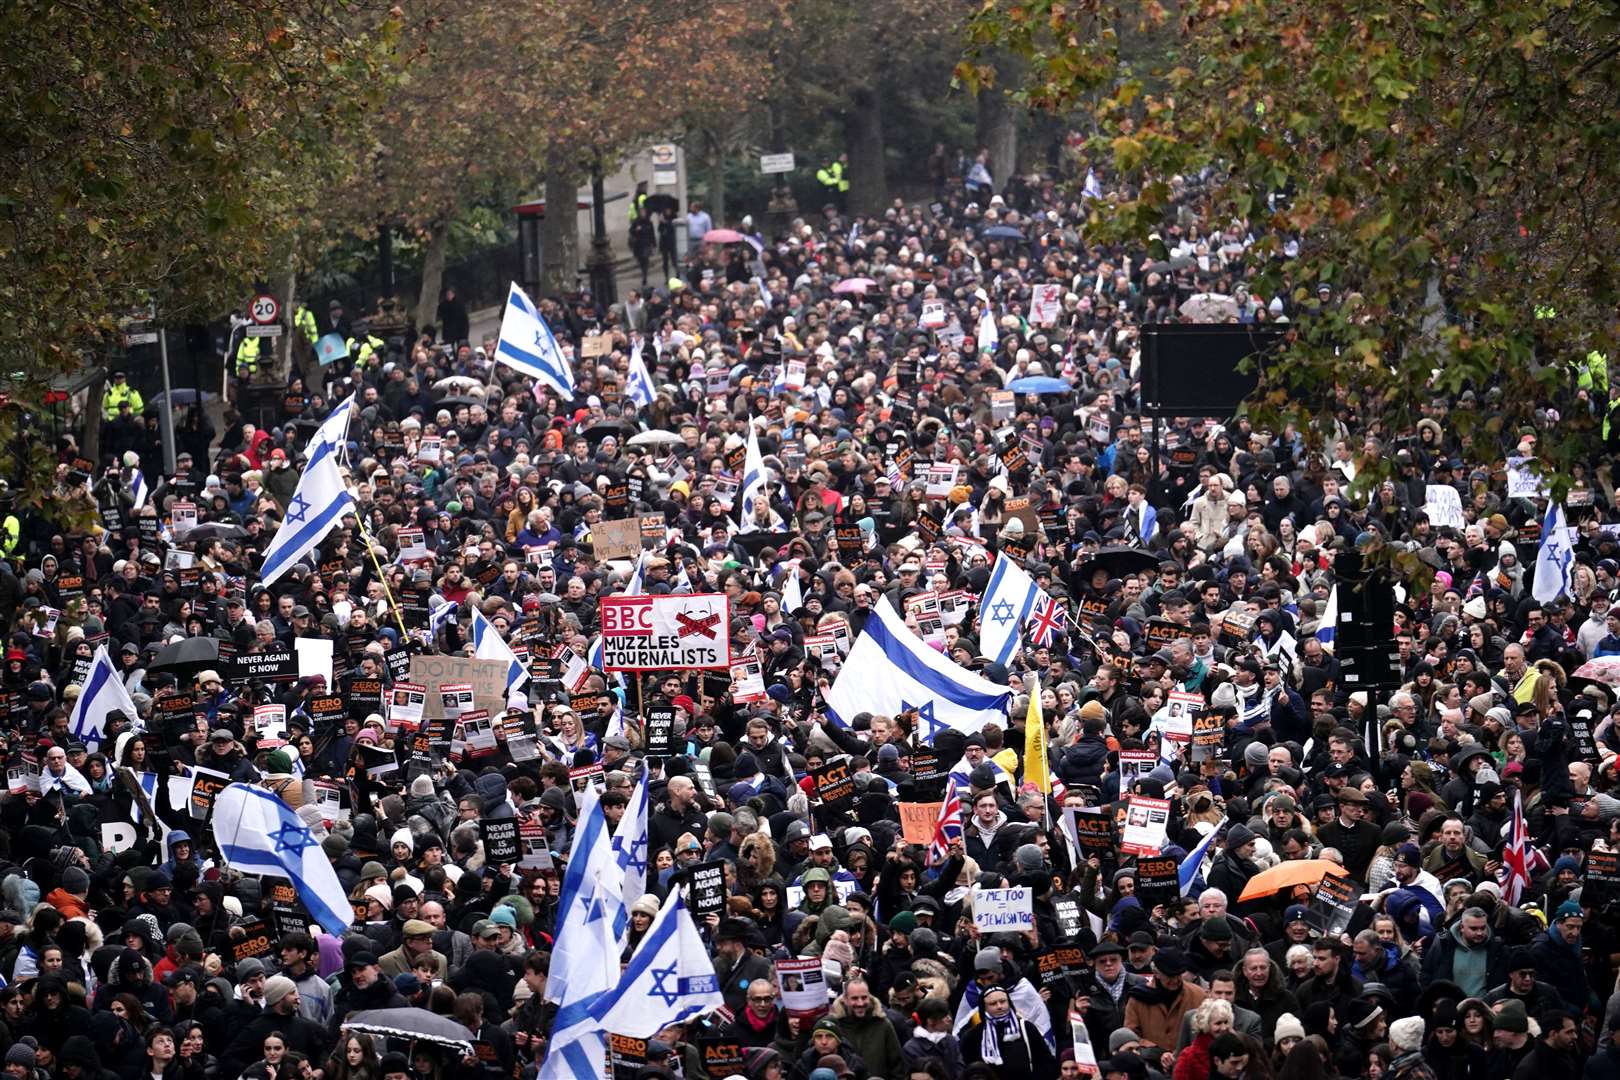 The march was organised by the charity Campaign Against Antisemitism (Jordan Pettitt/PA)